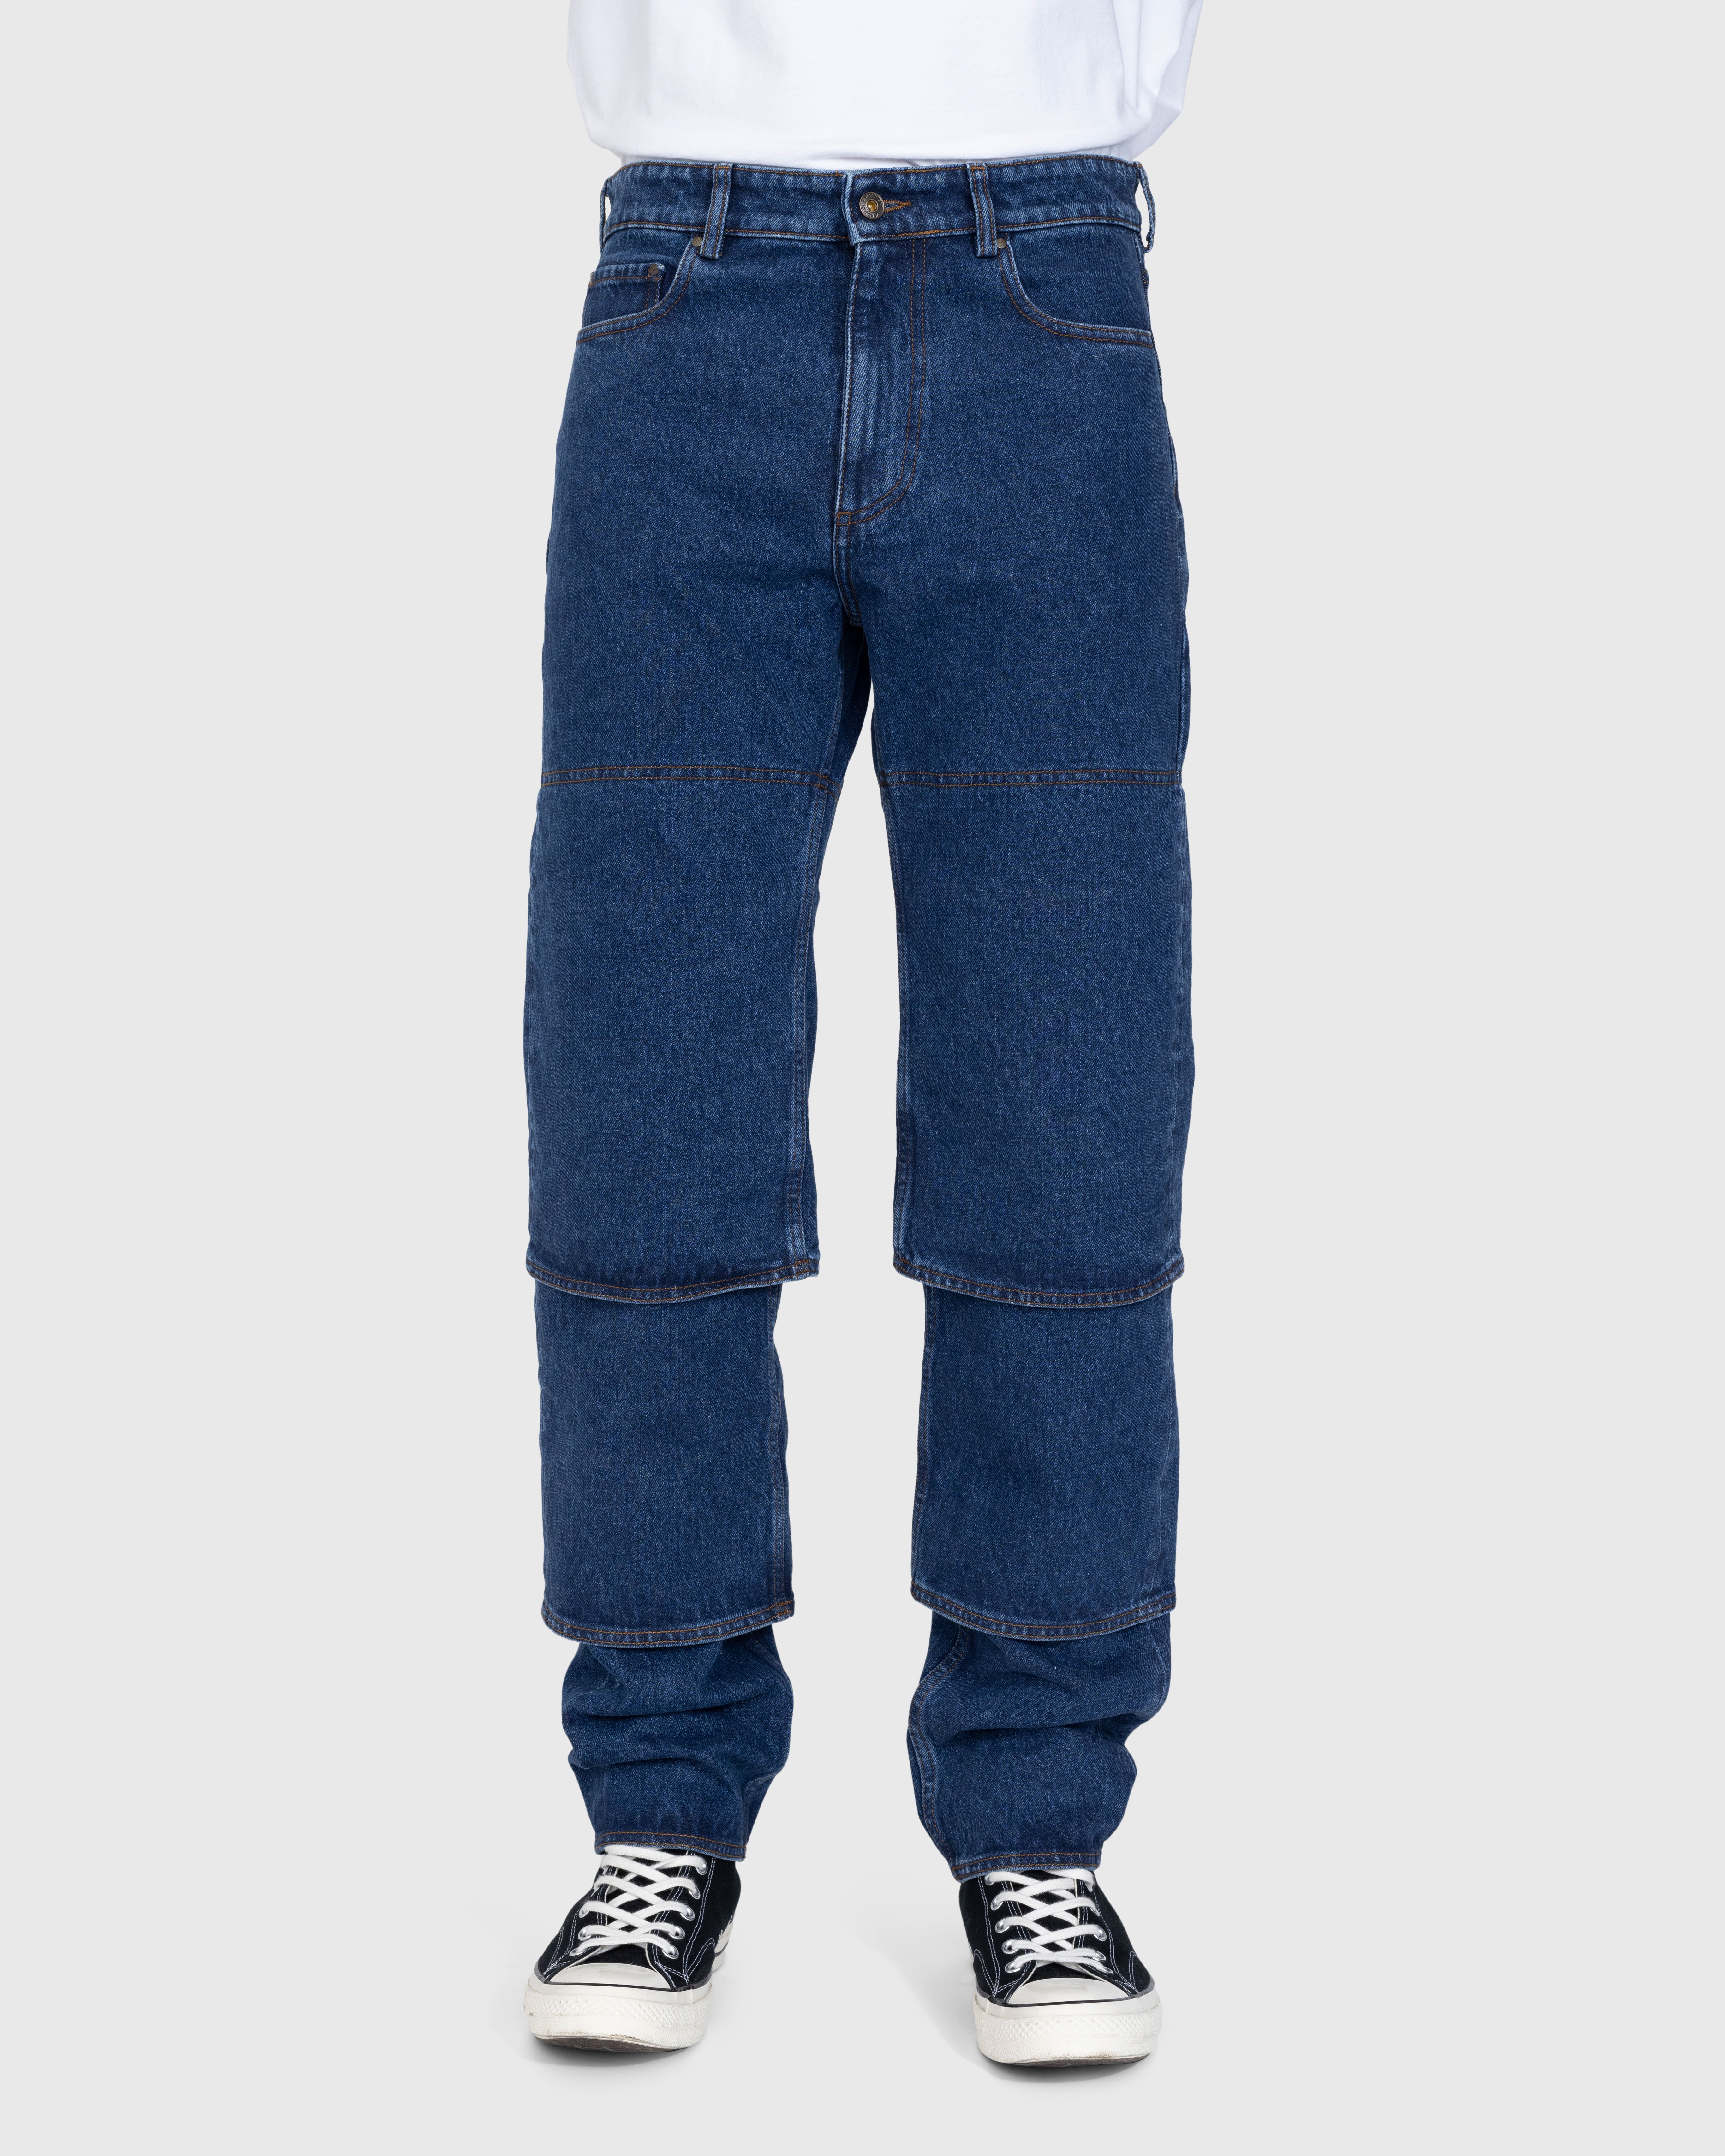 Y/Project - Classic Multi-Cuff Jeans Blue - Clothing - Blue - Image 2